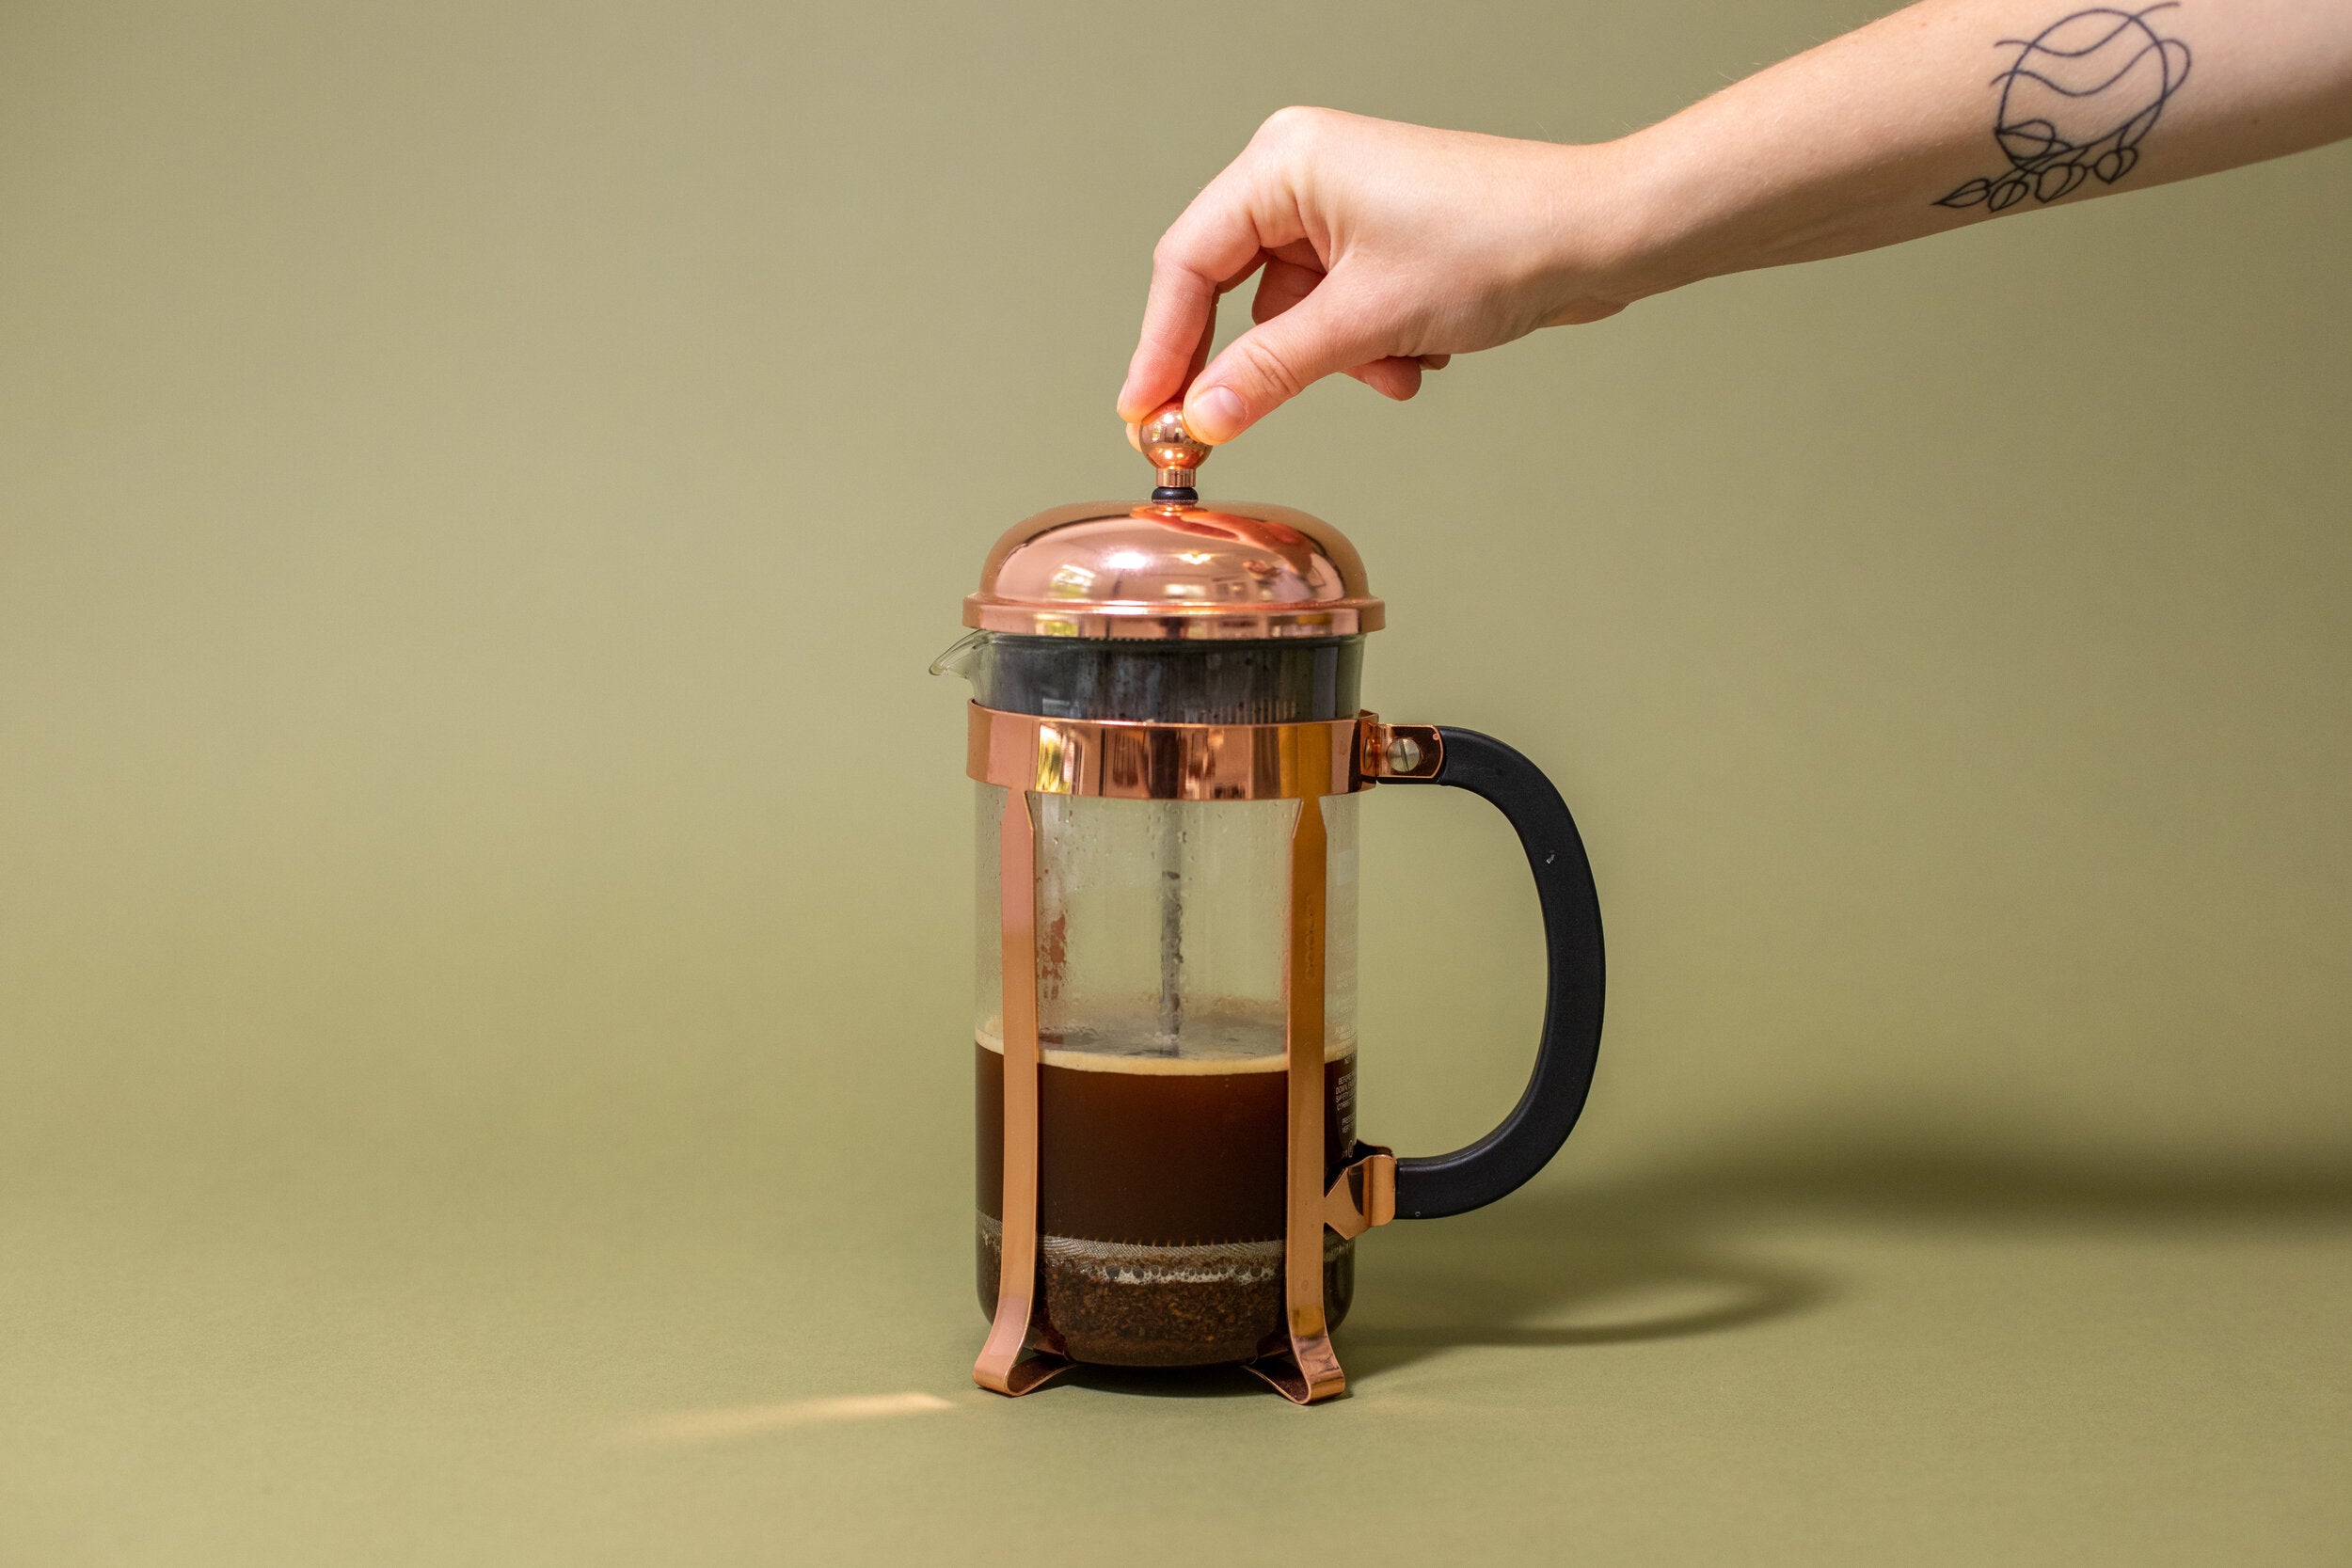 French Press Coffee Brewing Guide - How to Use a French Press to Brew